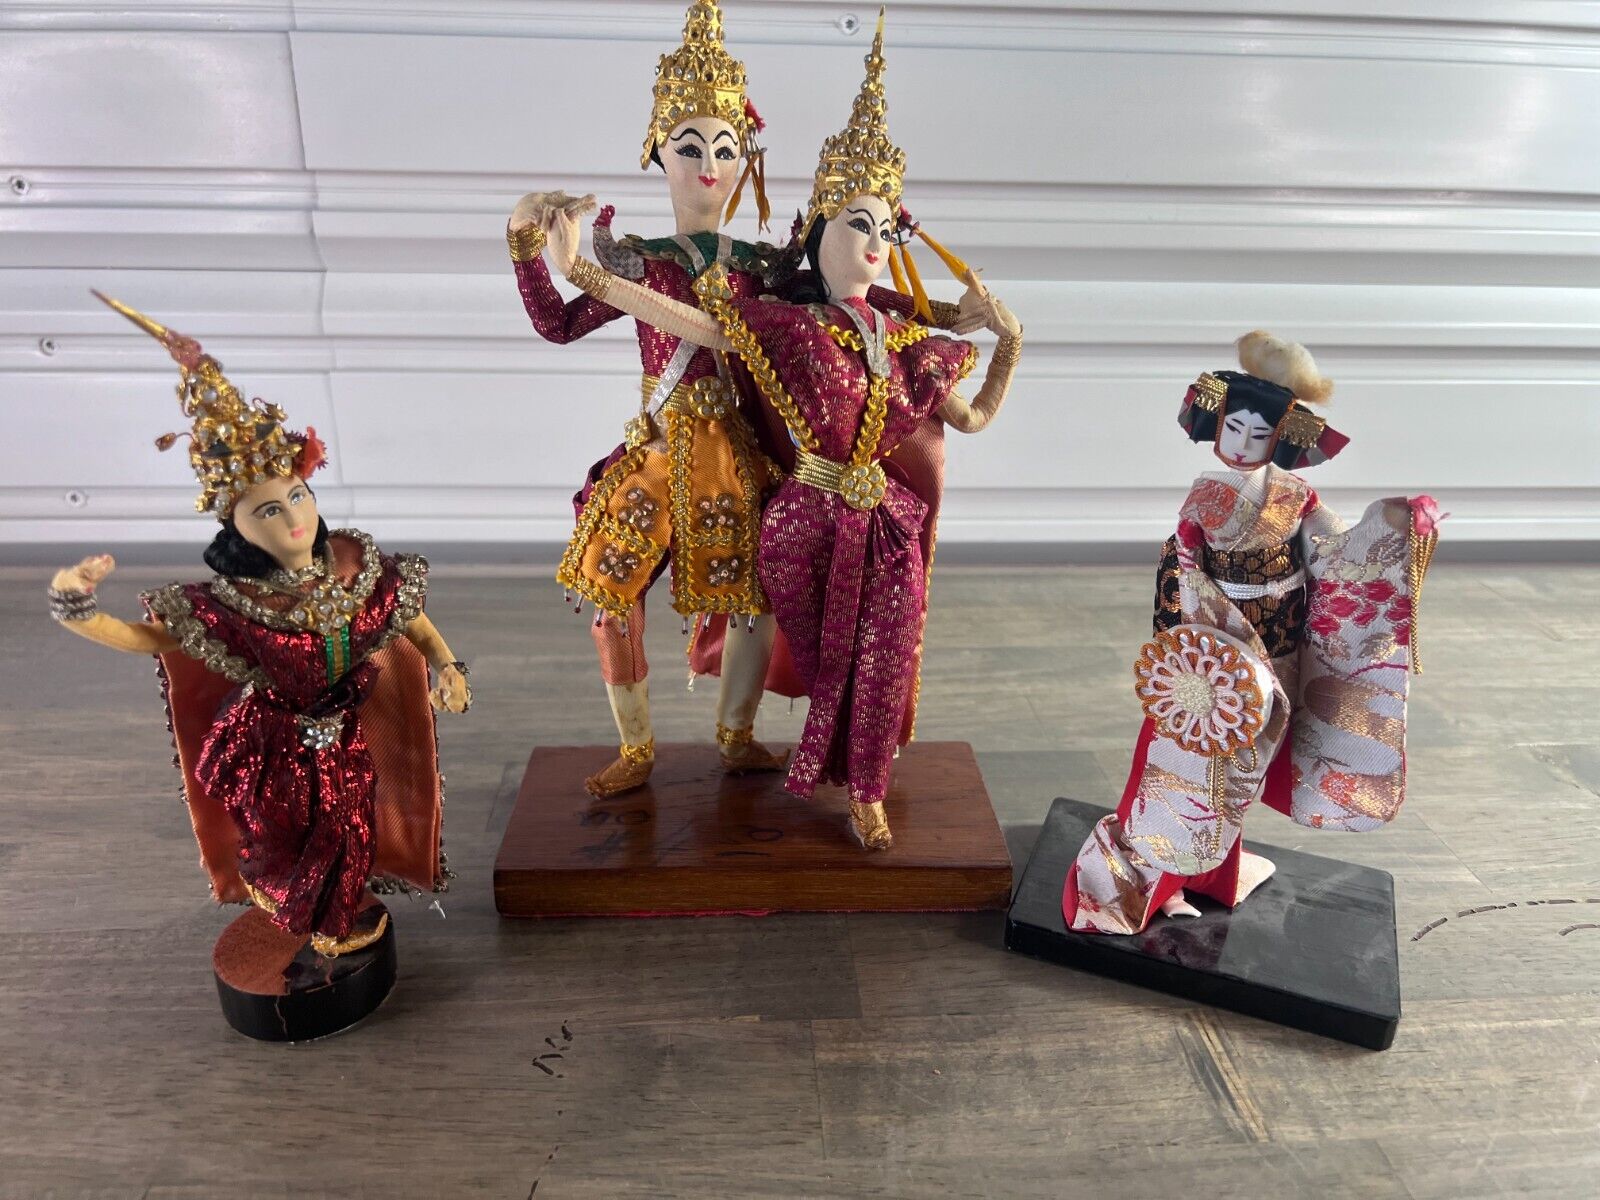 Lot of 3 Vintage International Collector\'s Dancing Doll Thailand Handmade